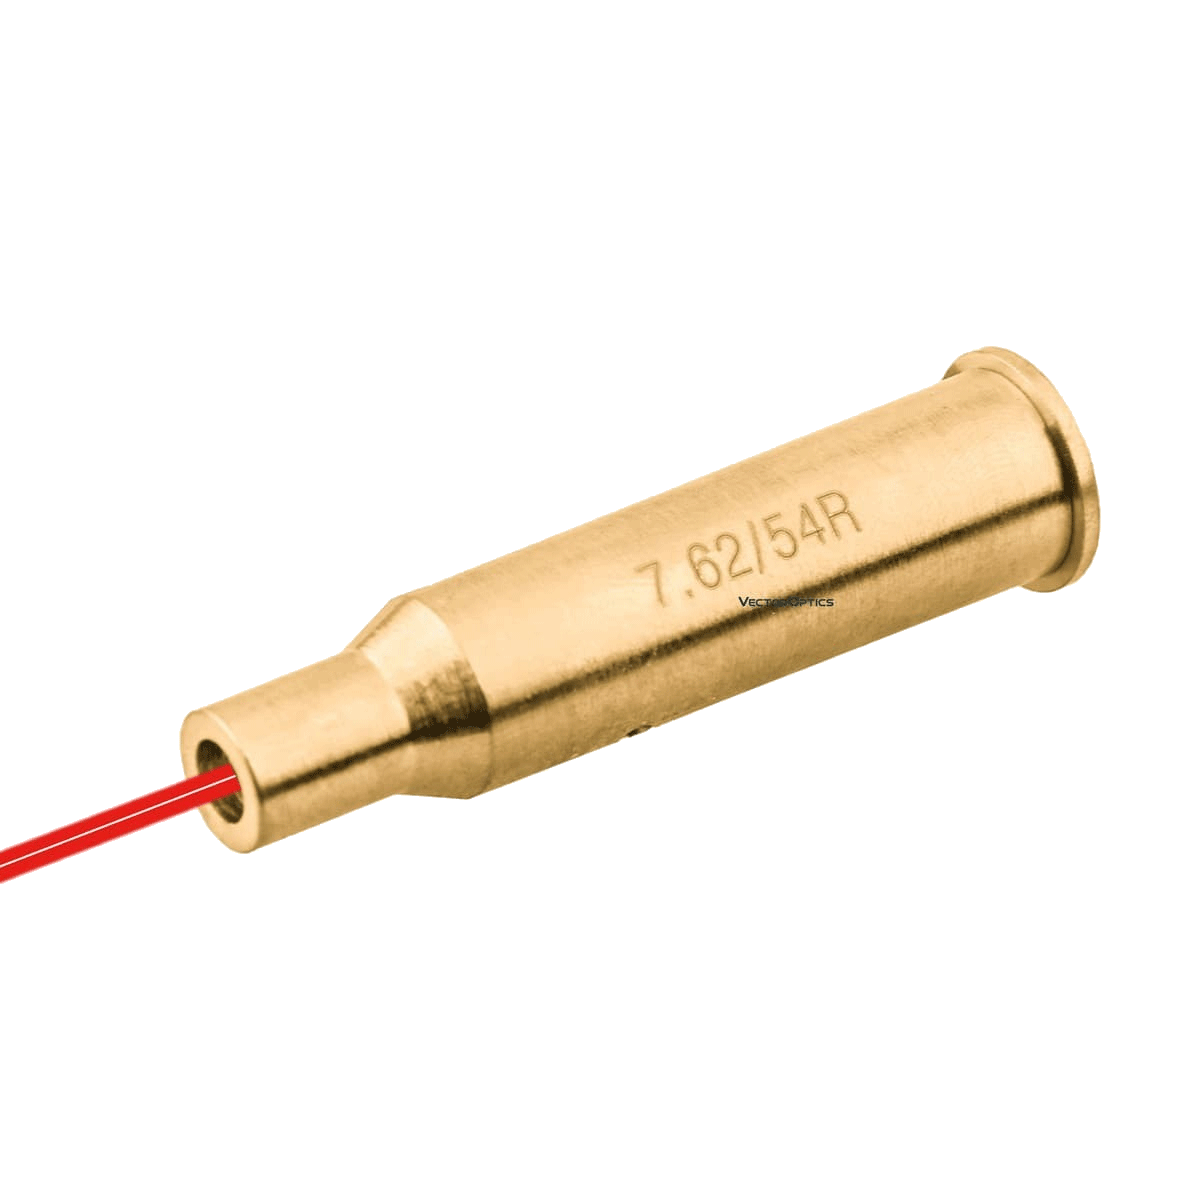 7.62x54R Cartridge Red Laser Bore Sight